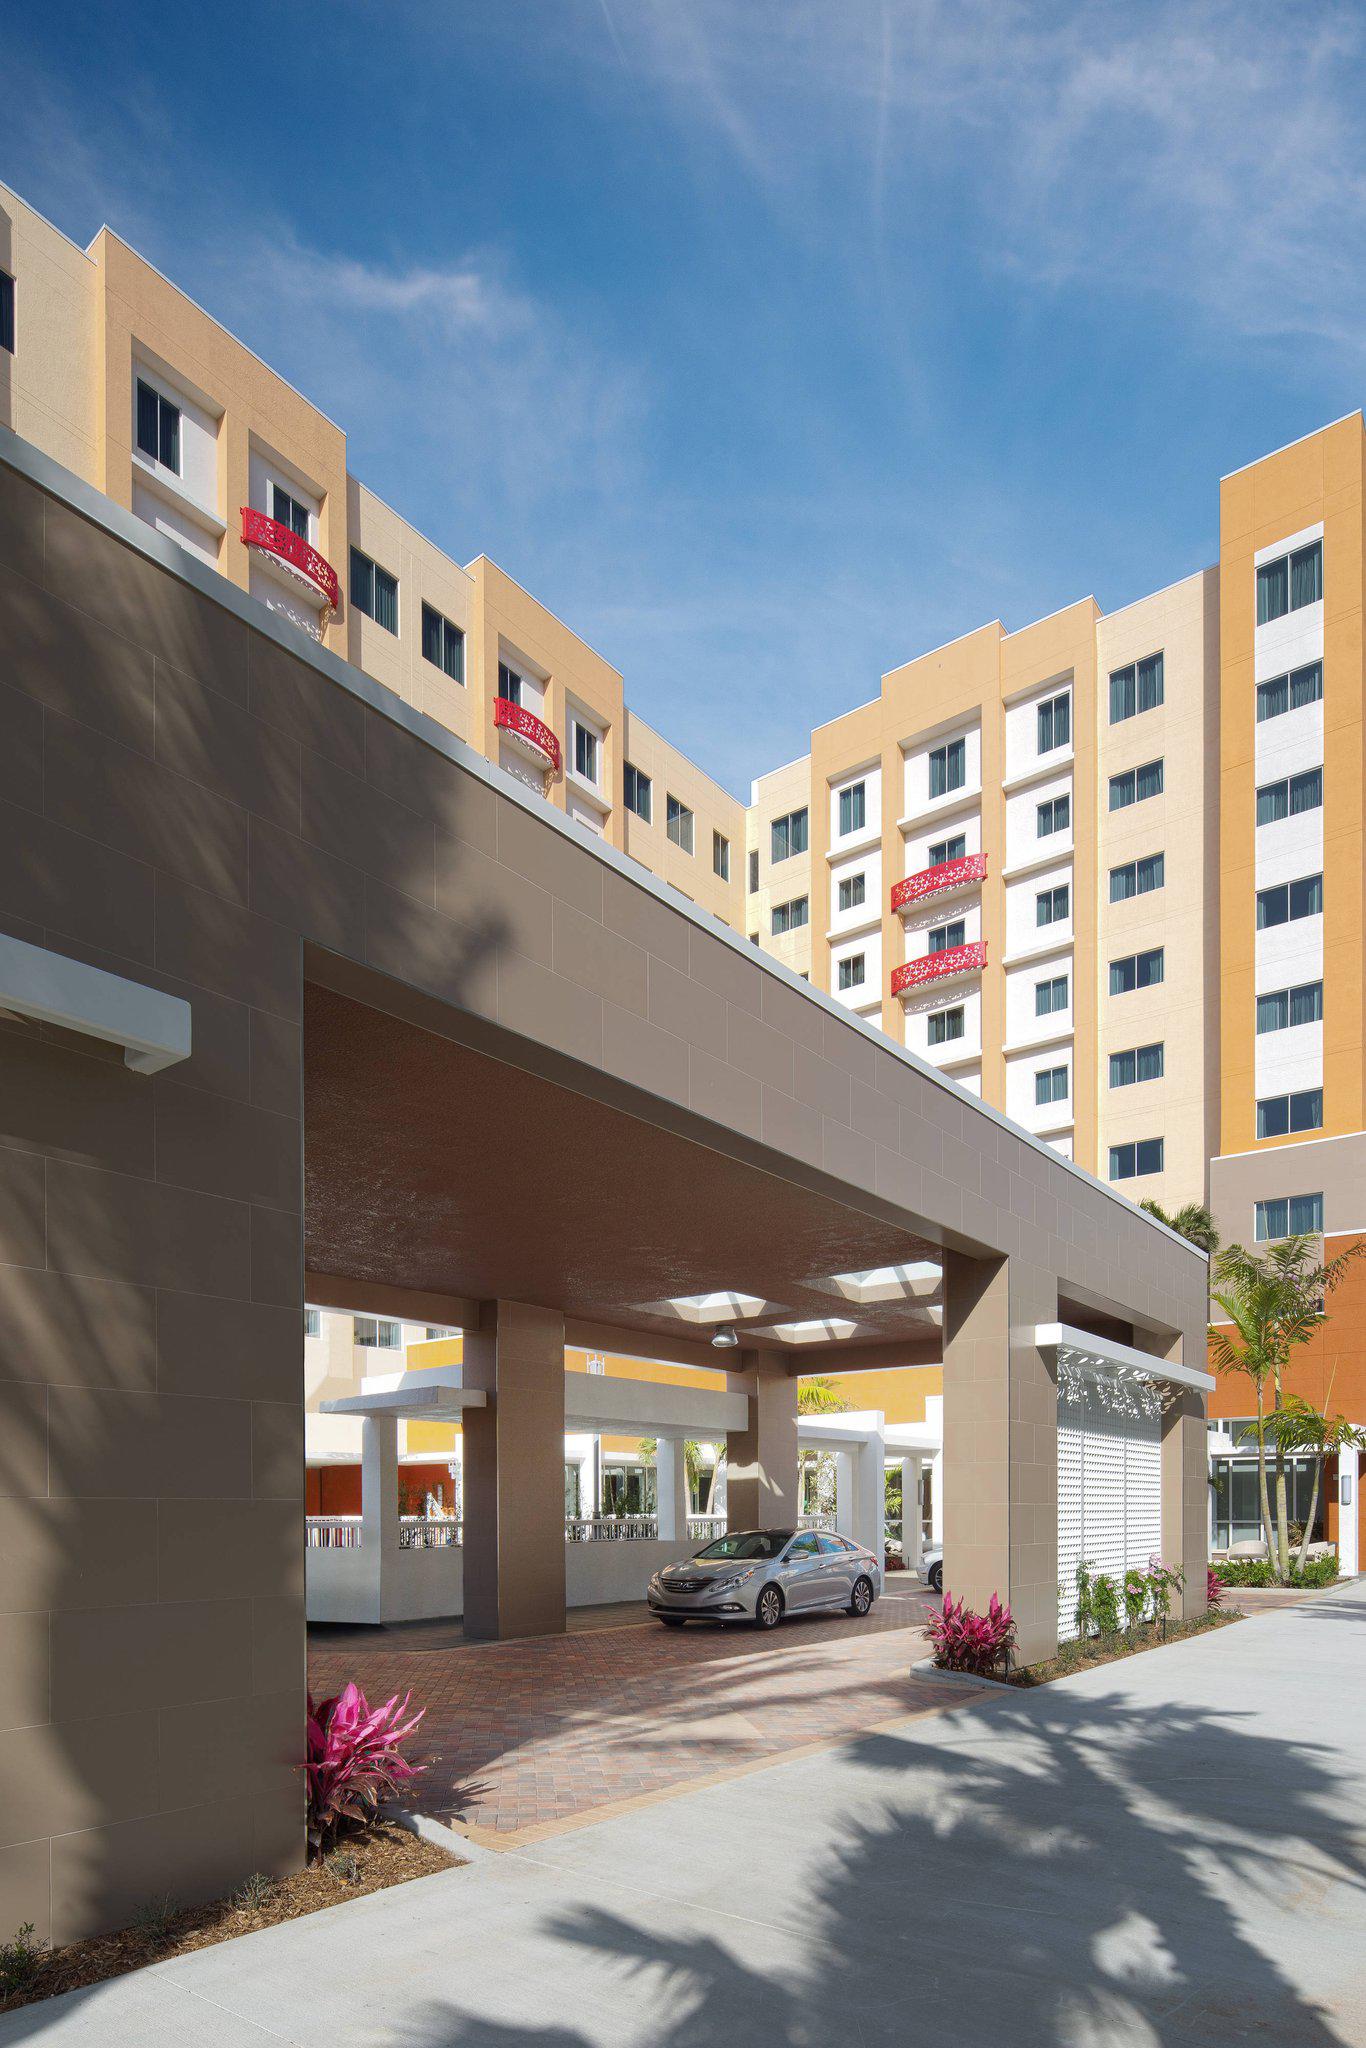 Residence Inn by Marriott West Palm Beach Downtown/Rosemary Square Area